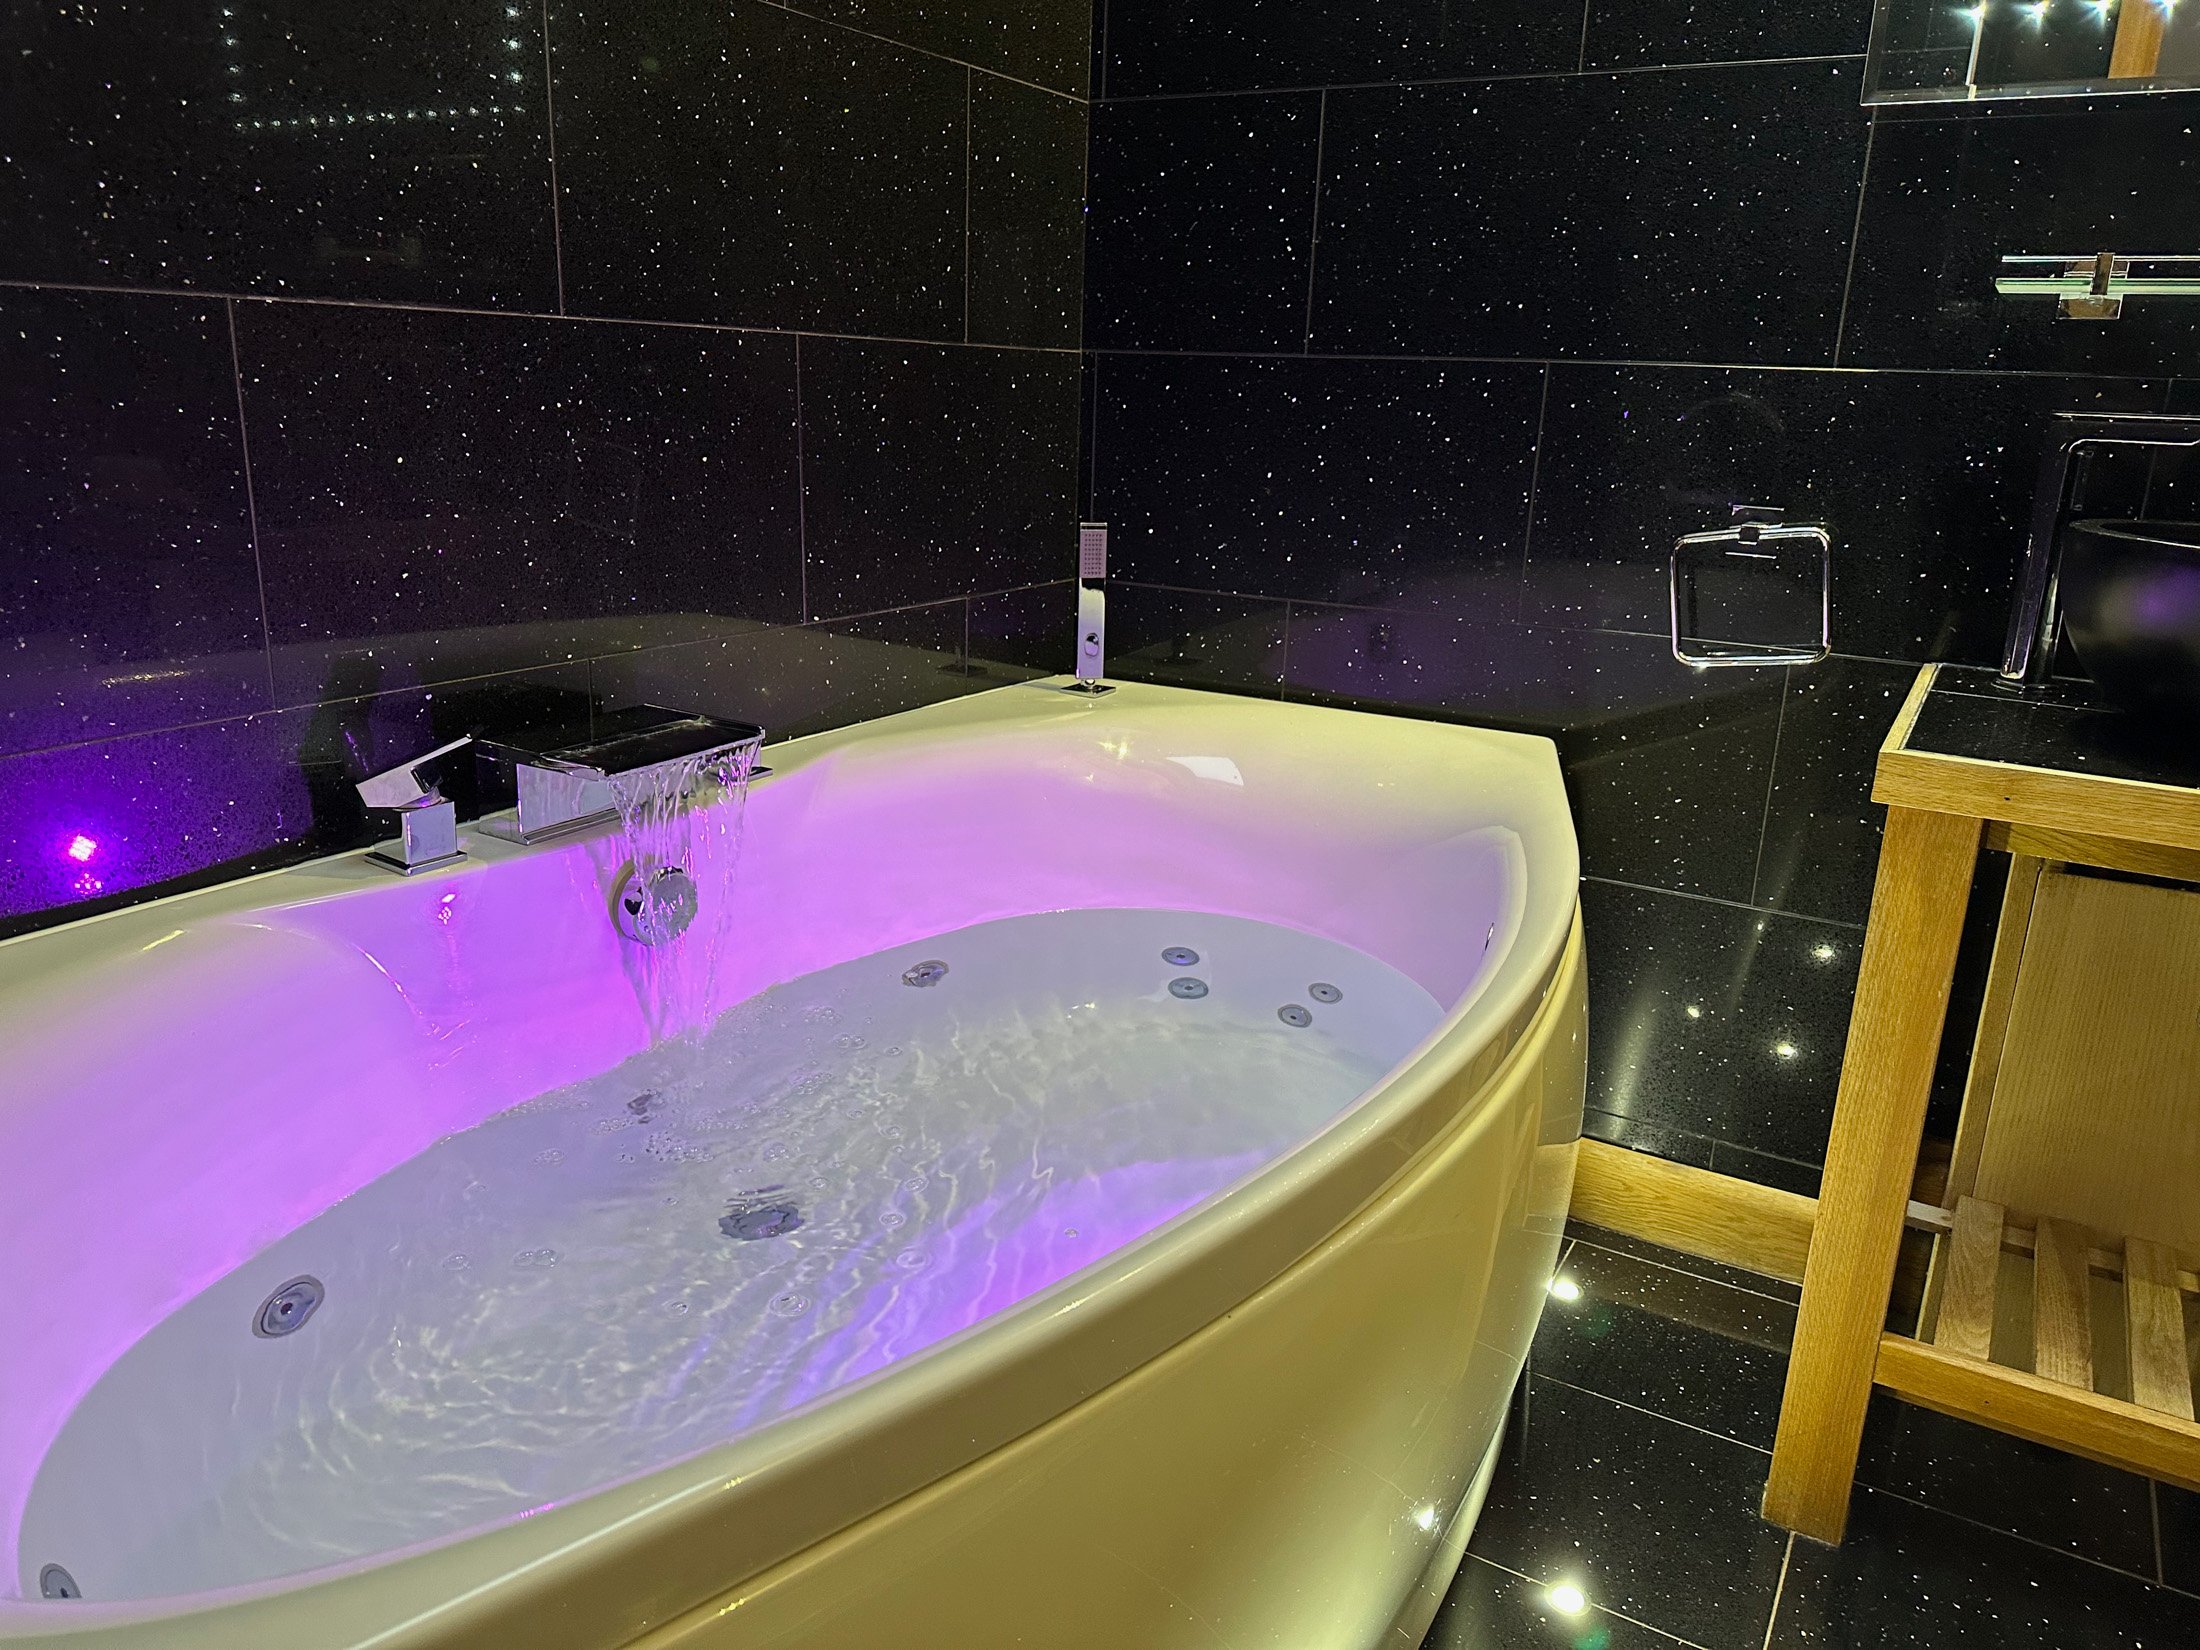 Romantic and relaxing spa-bath for two